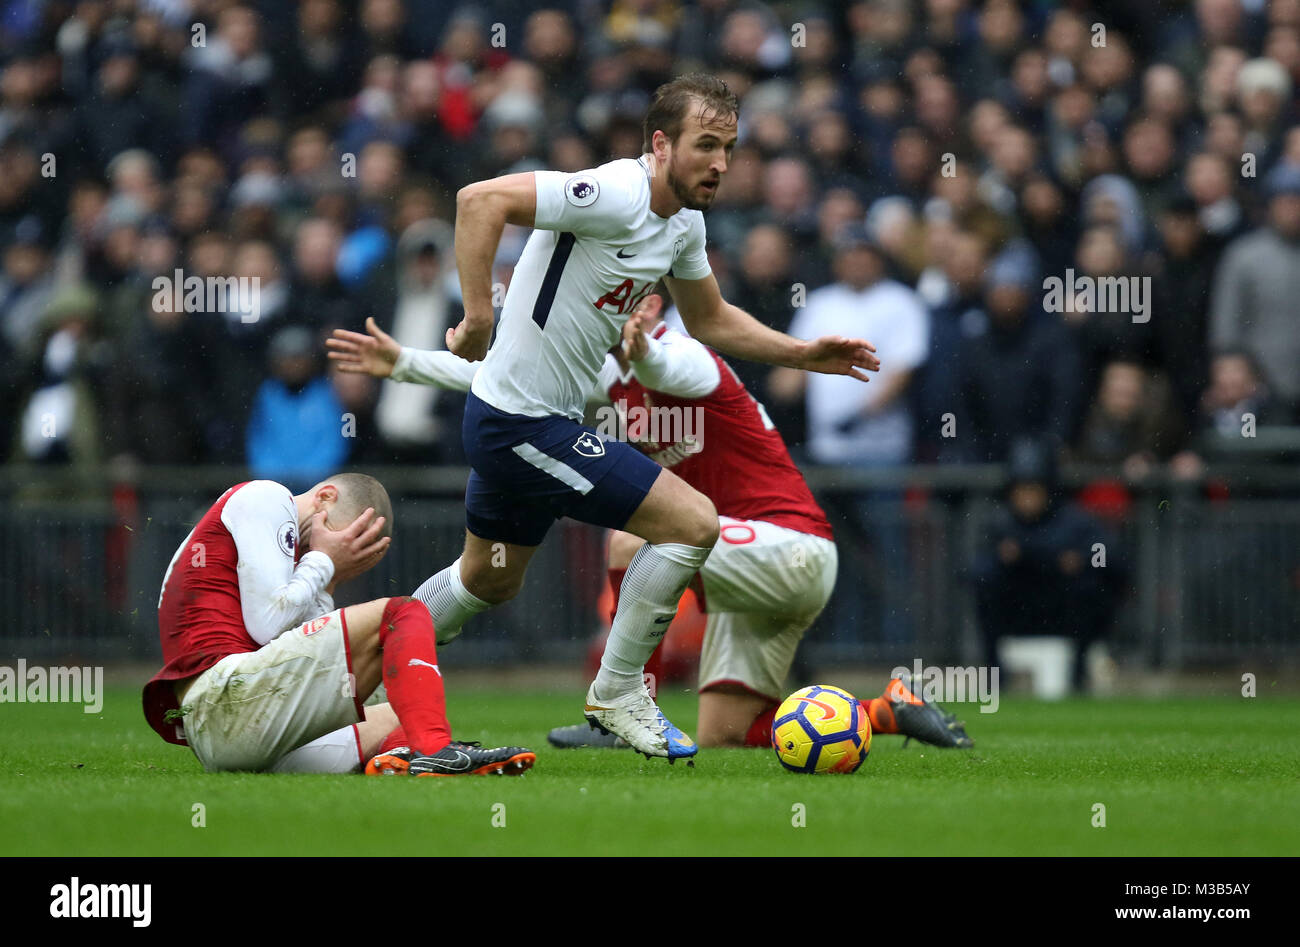 London, UK. 10th Feb, 2018. Jack Wilshere (A) Harry Kane (TH) Shkodran Mustafi (A) at the English Premier League football match between Tottenham Hotspur v Arsenal at Wembley Stadium, London, on February 10, 2018. **THIS PICTURE IS FOR EDITORIAL USE ONLY** Credit: Paul Marriott/Alamy Live News Stock Photo